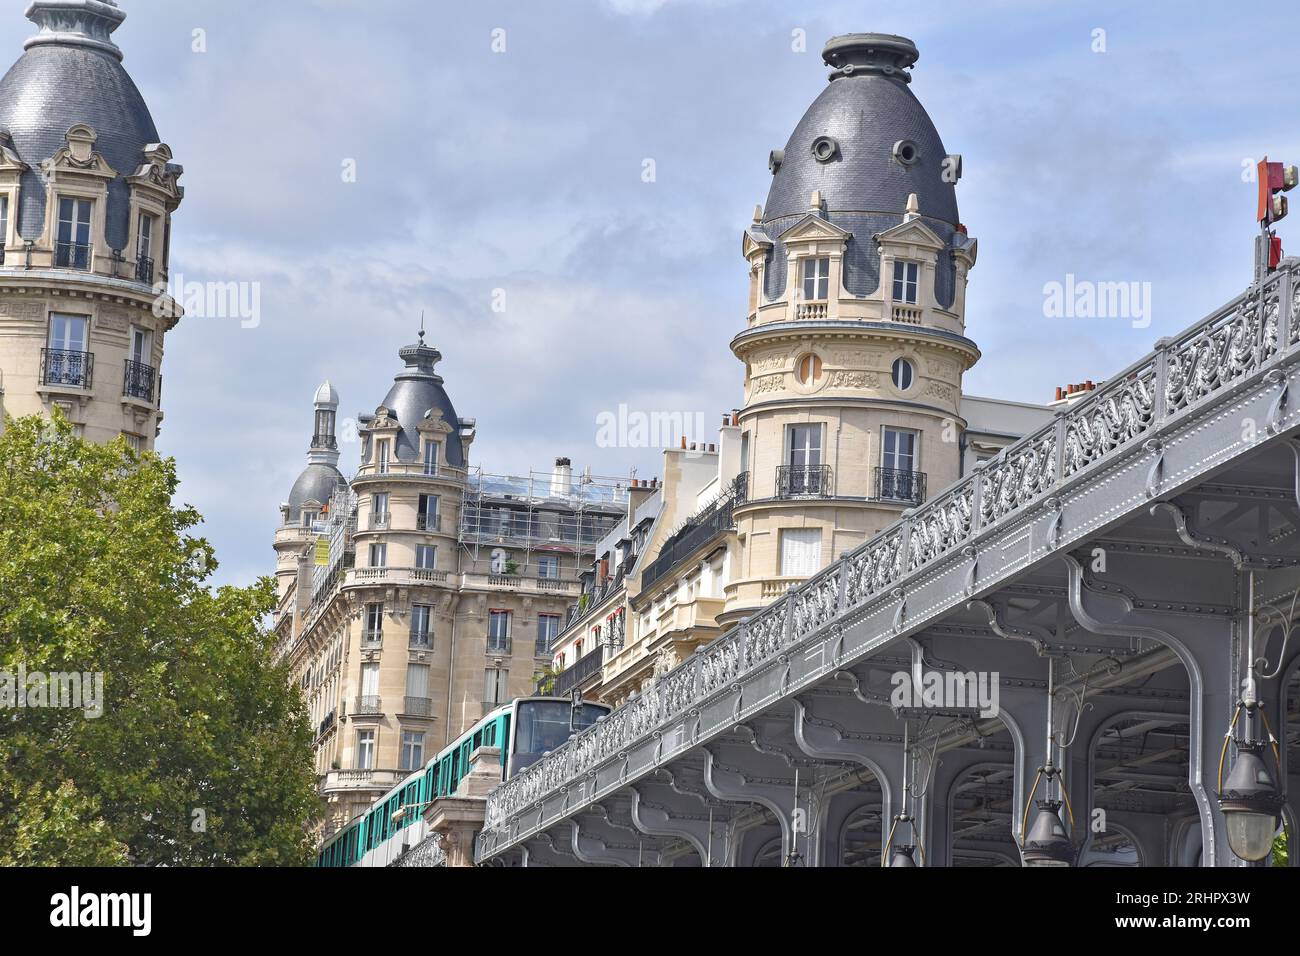 Pont de Bir Hakeim, the upper deck of the Metro Line 6, supported by cruciform cast iron columns, Belle Epoque apartment buildings of Passy beyond Stock Photo